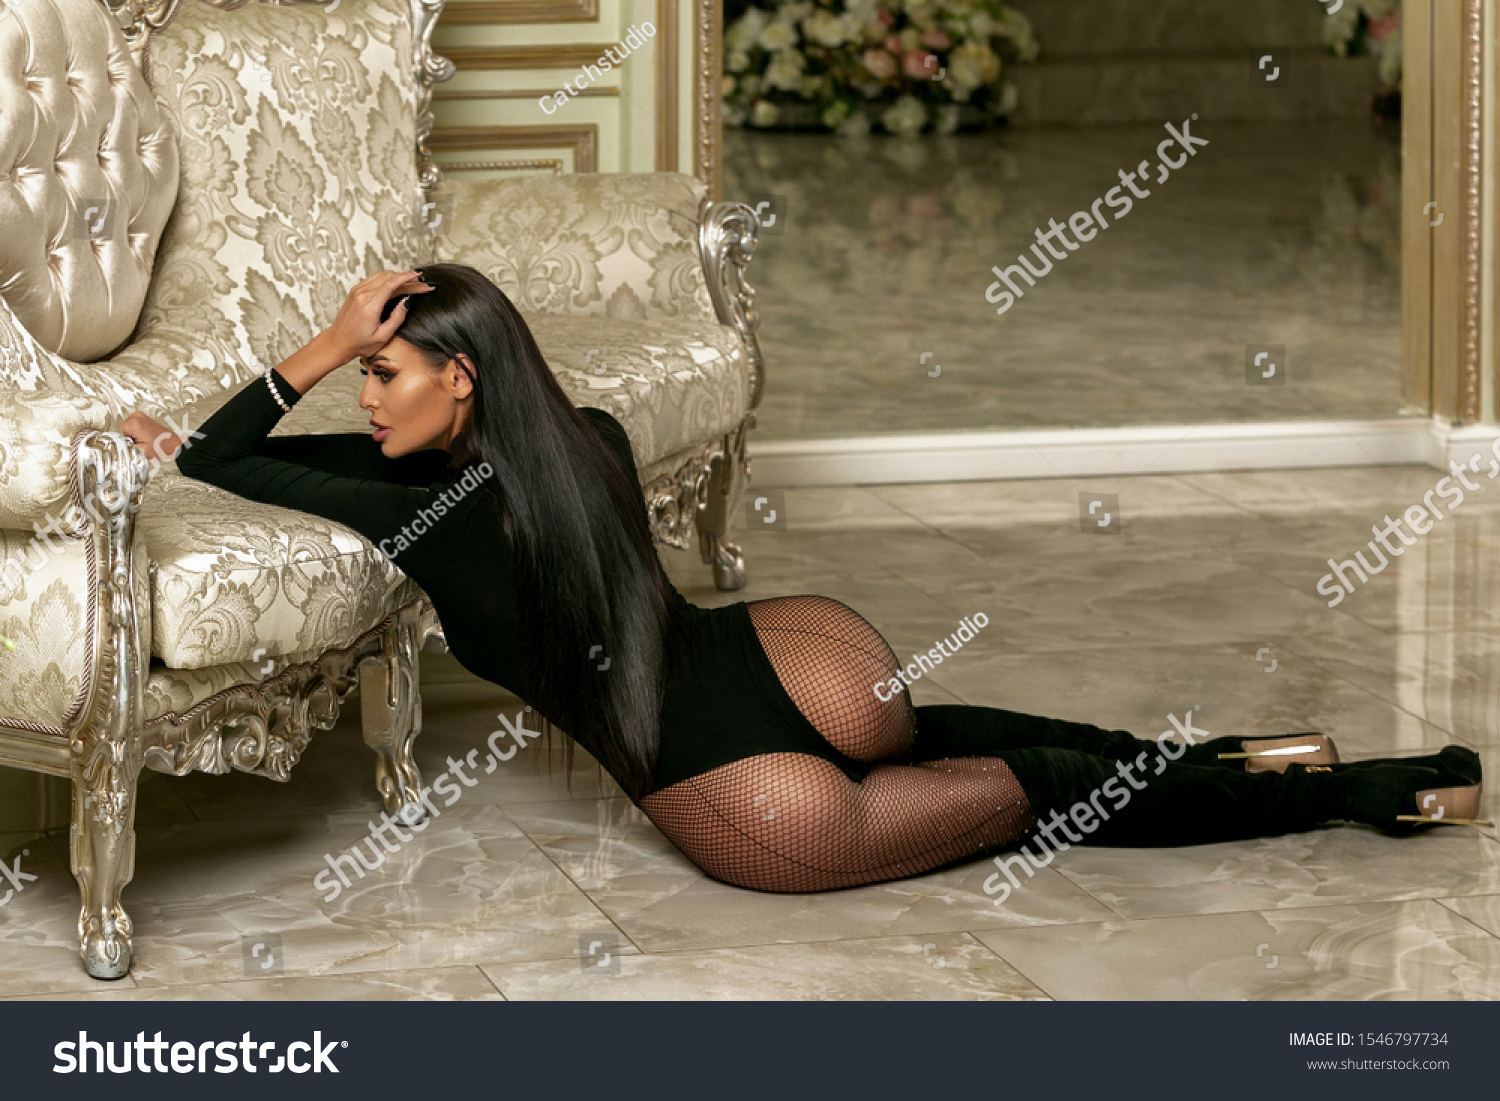 Beautiful young girl in a black bodysuit and boots in the living room. Attractive brunette model with long legs sits on the floor near the sofa and poses. Successful life theme. Horizontal photo. #1546797734